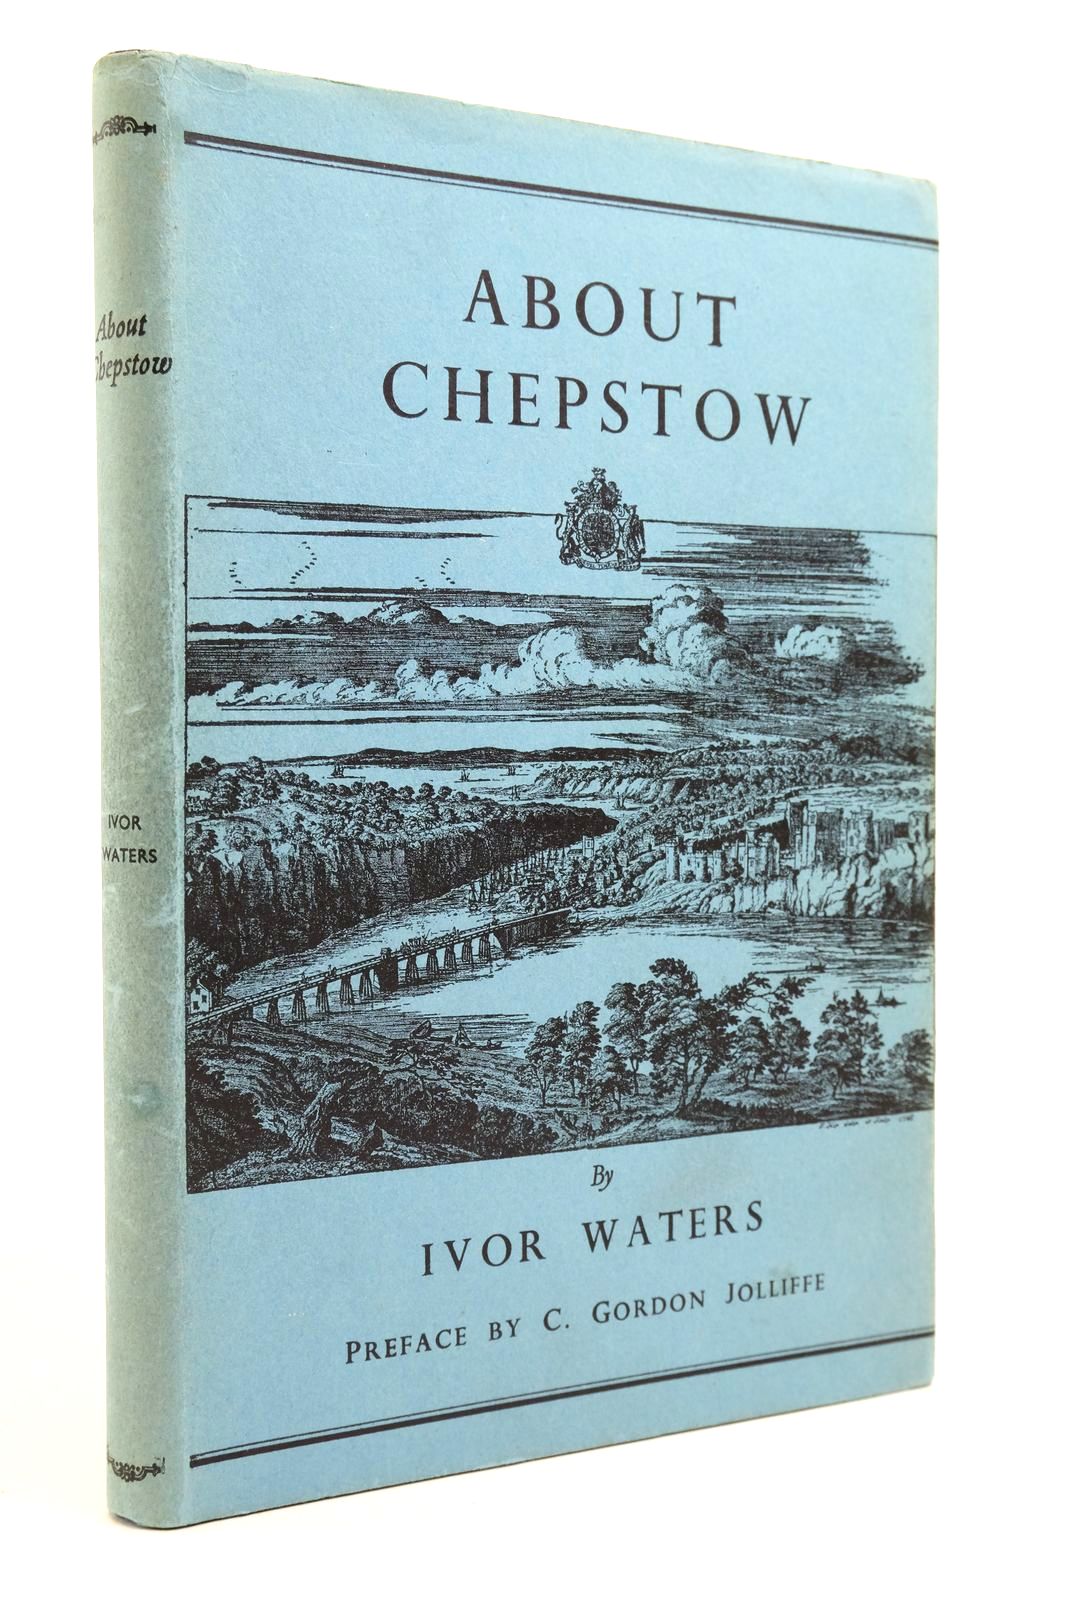 Photo of ABOUT CHEPSTOW- Stock Number: 2140667